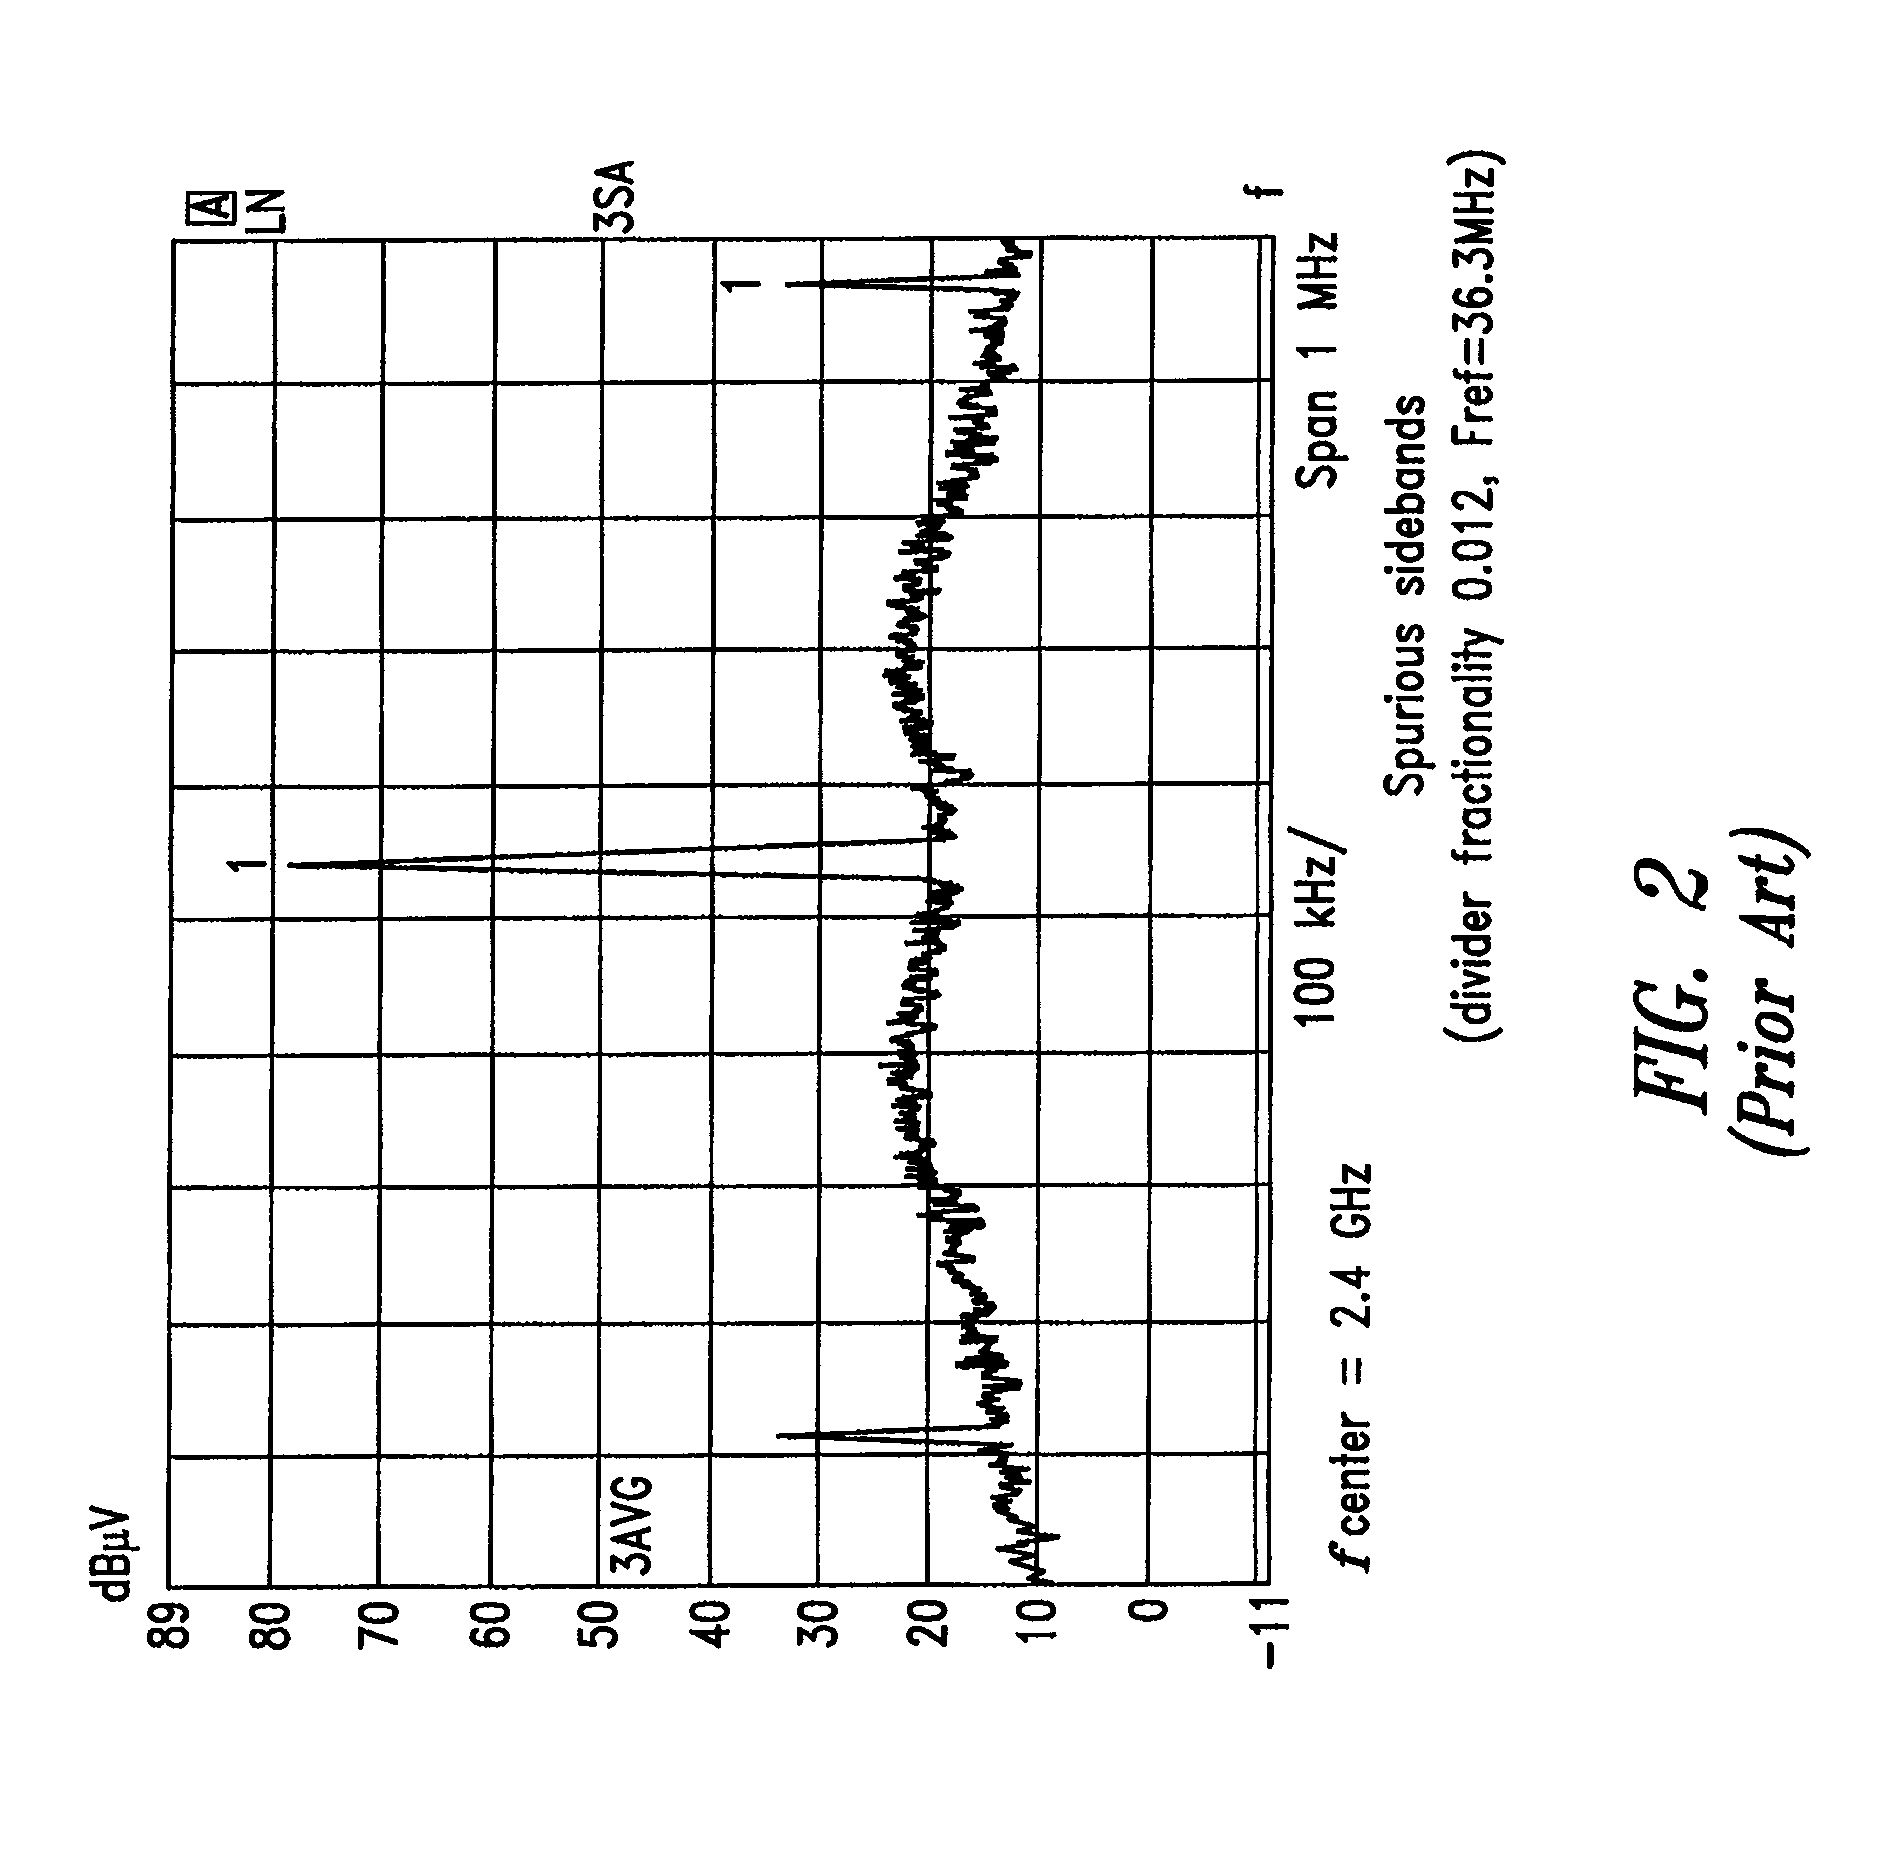 Frequency synthesizer circuit comprising a phase locked loop